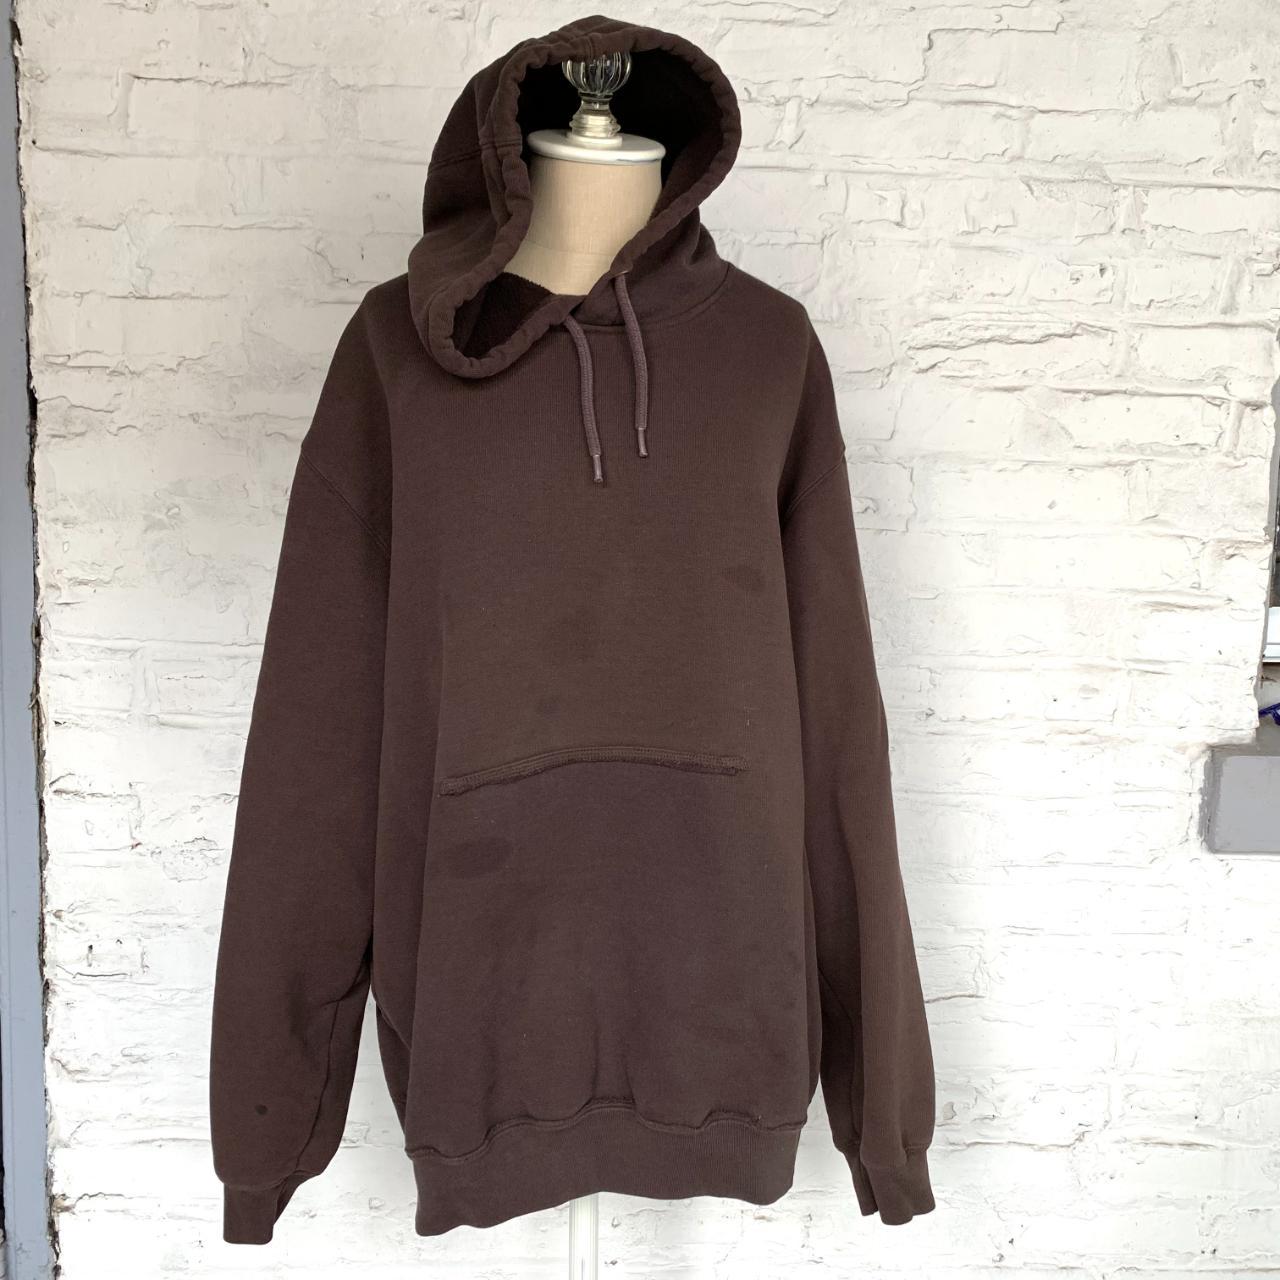 Product Image 1 - Carhartt hoodie, brown, pullover, logo